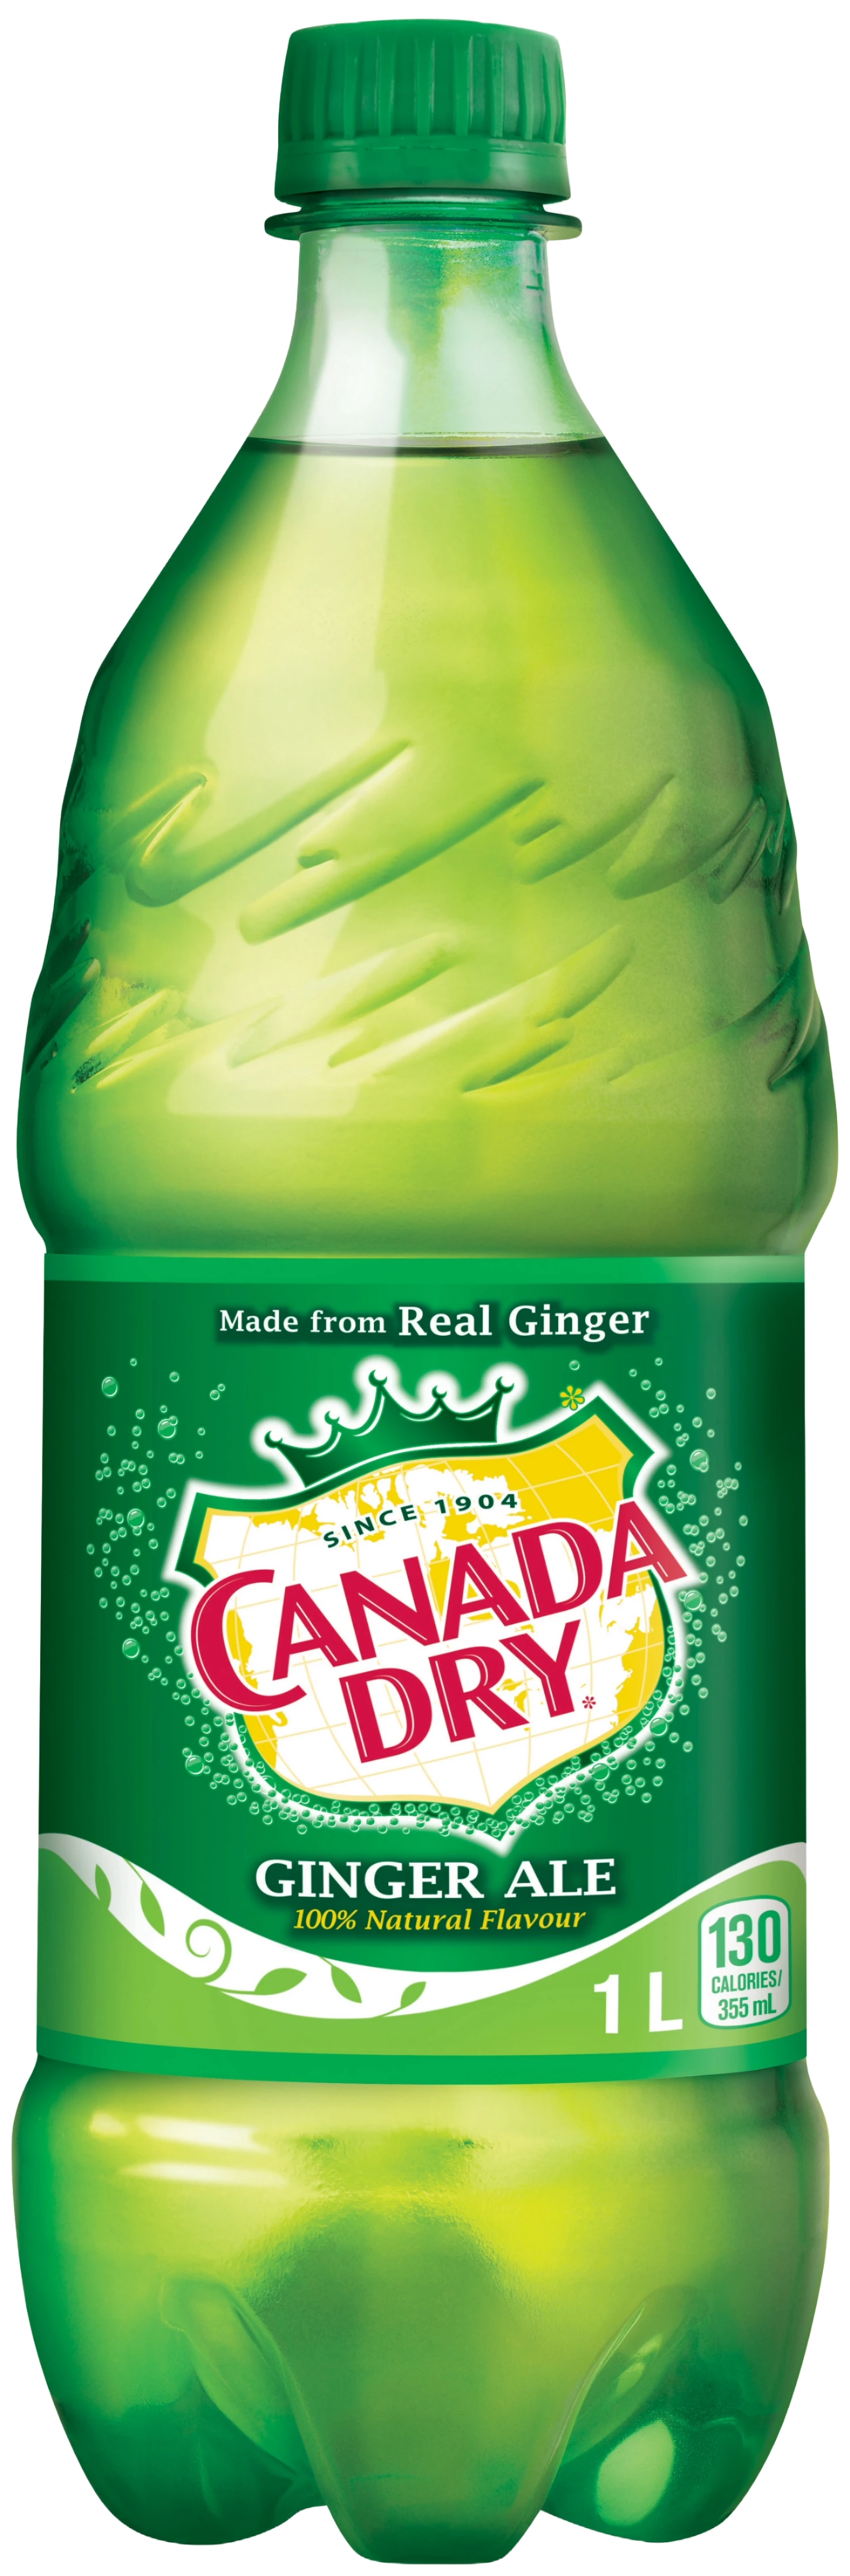 CANADA DRY GINGER ALE 1L BT